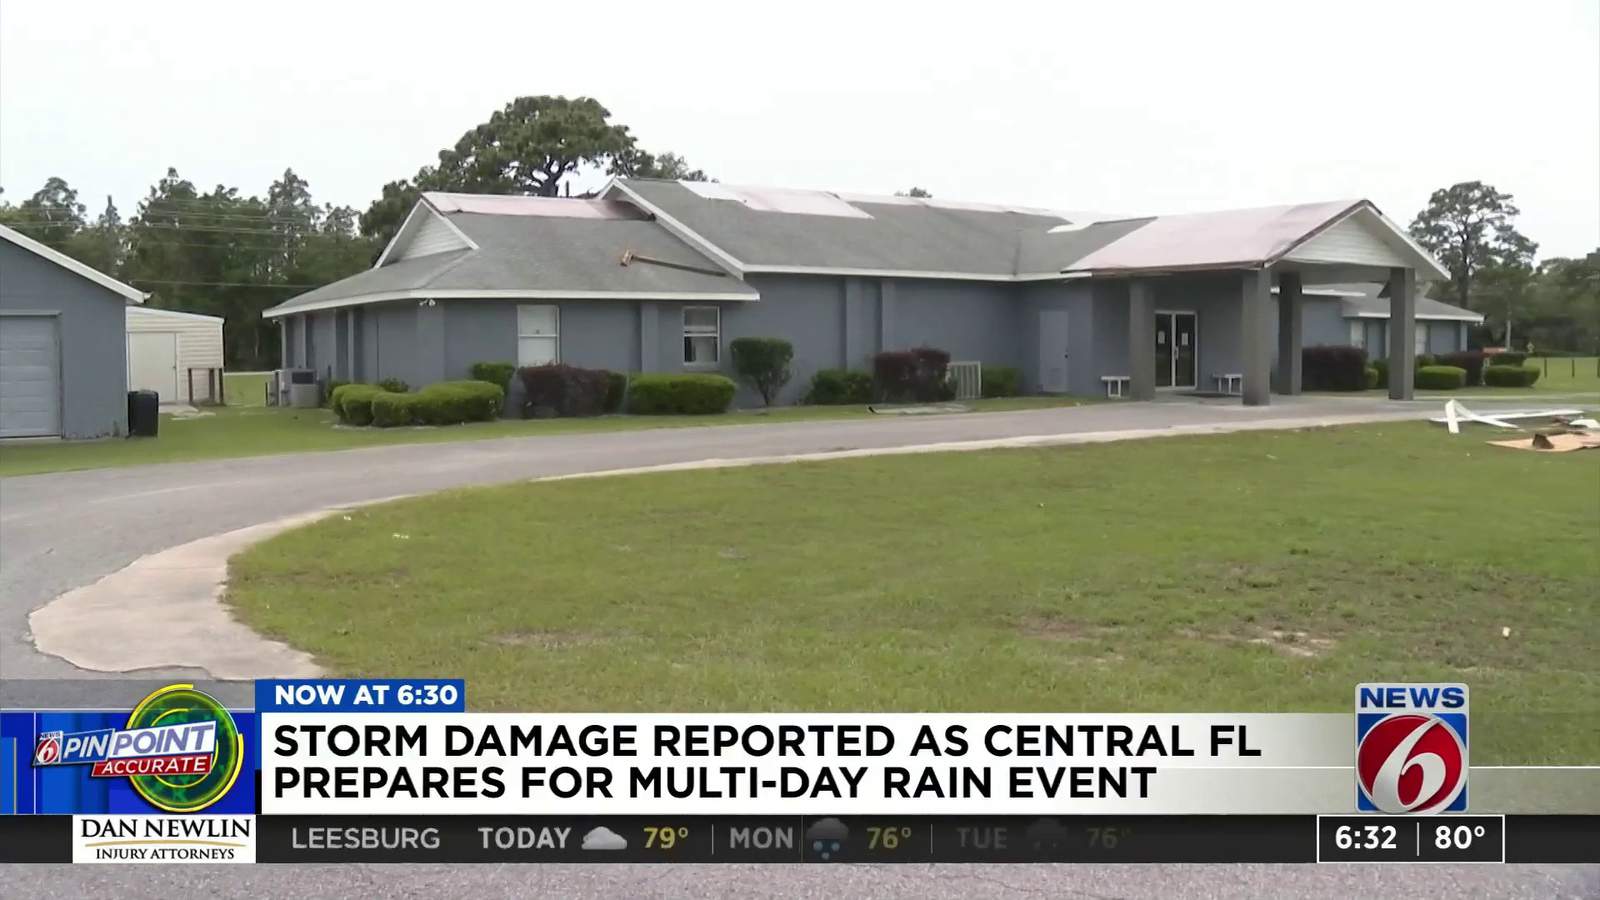 Storms damage church as people were inside rehearsing